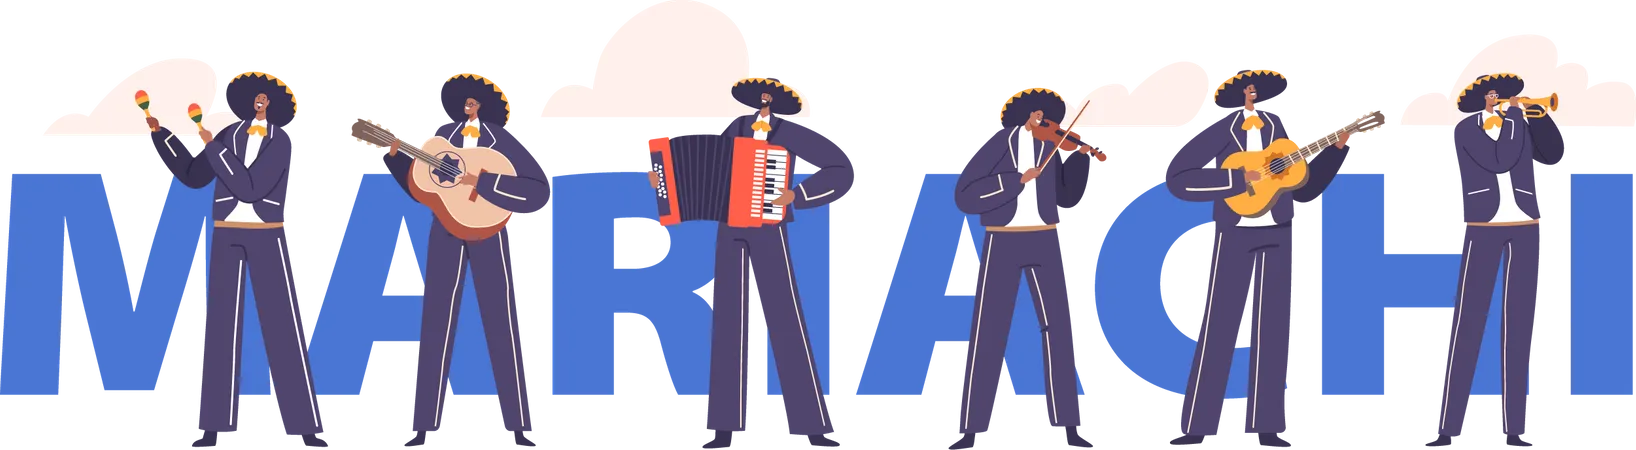 Mariachi musicians playing traditional mexican music  イラスト